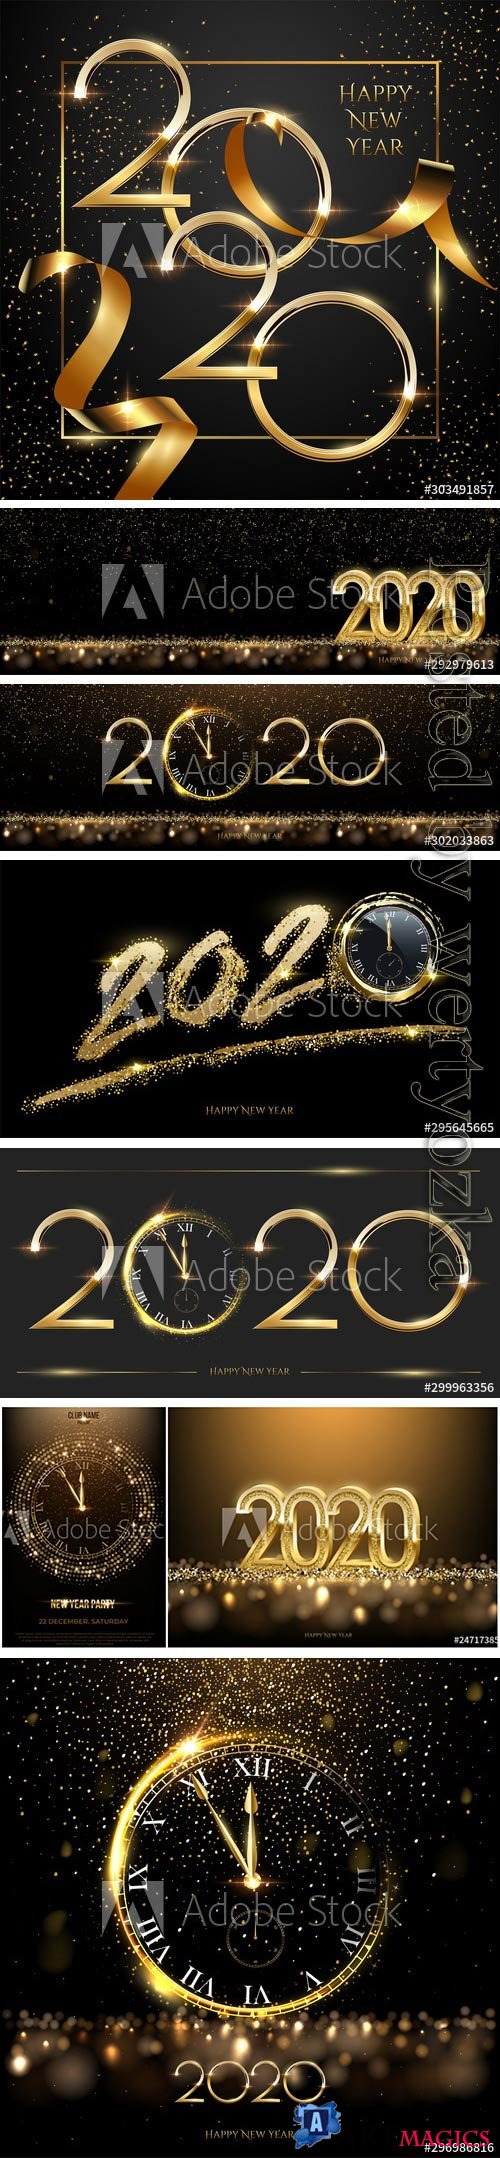 Golden 2020 Happy new year greeting card vector template